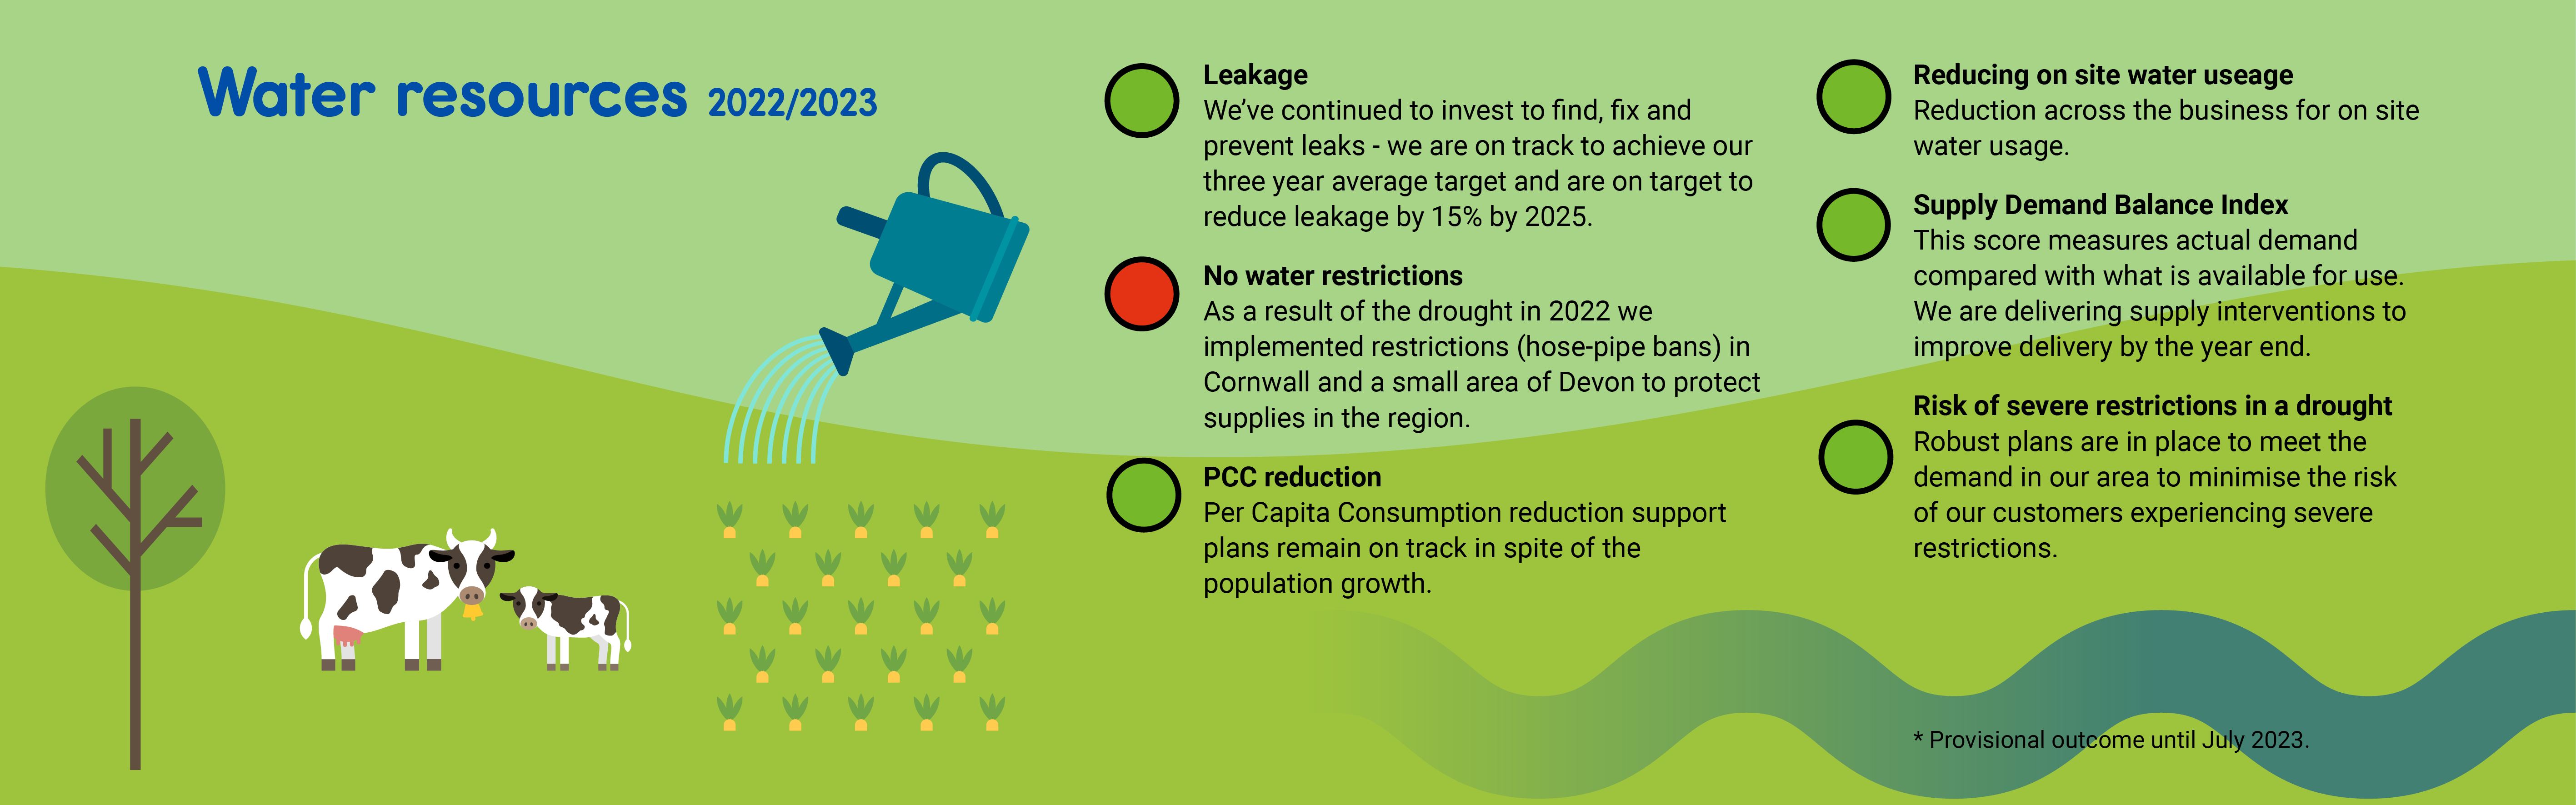 AB22-J10563_SWW_EP Infographic_v06_Section4_Water Resources.png